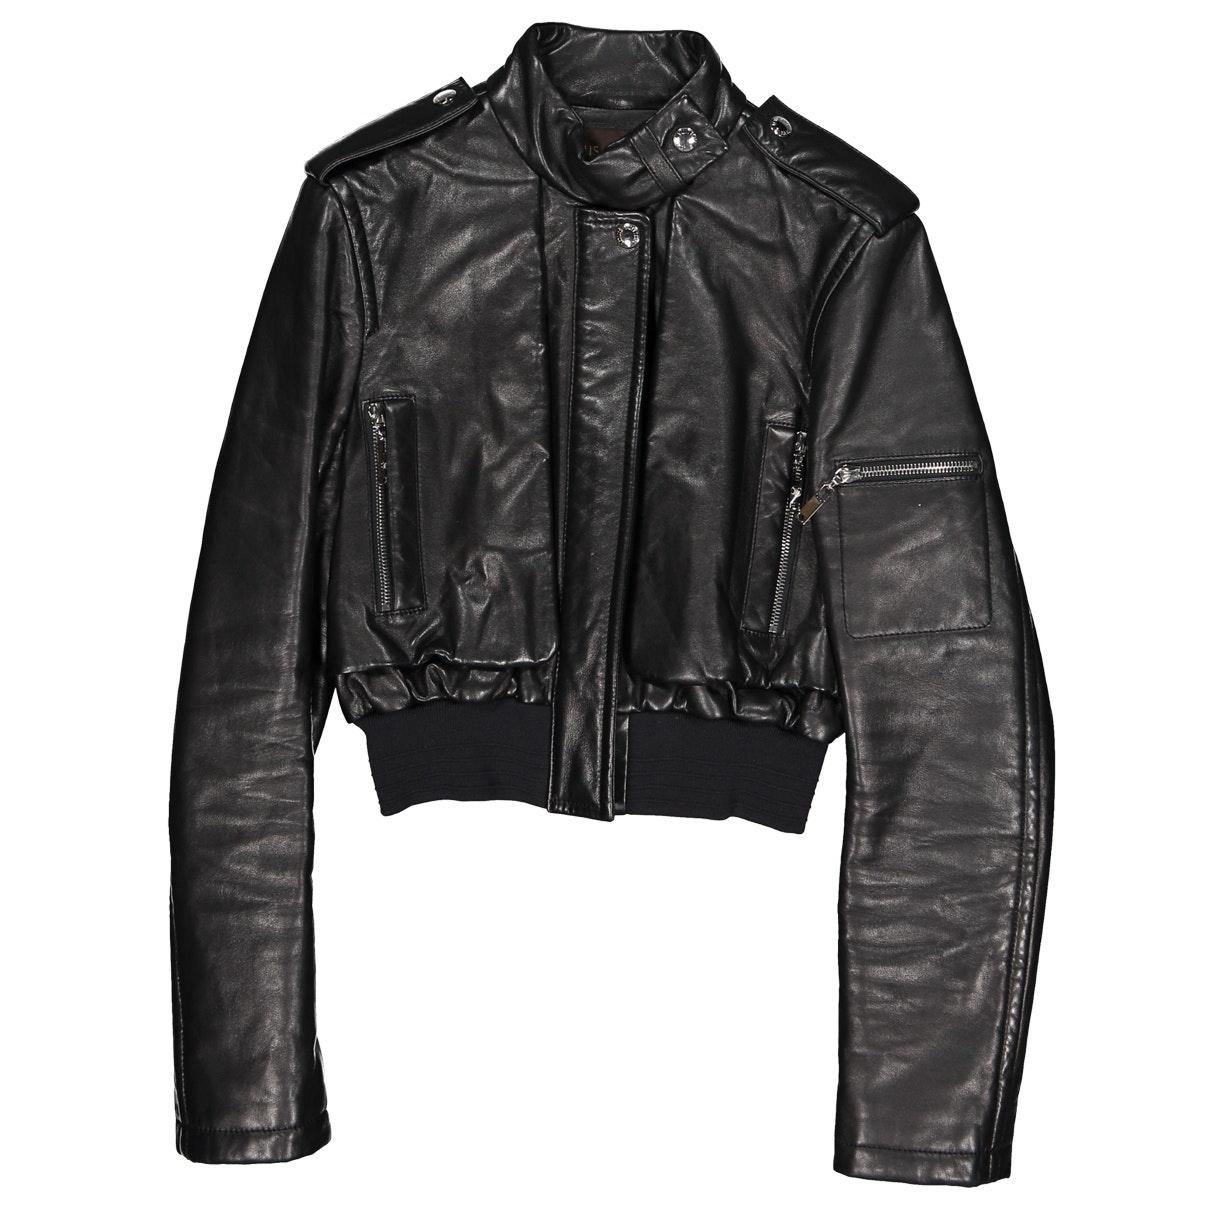 Louis Vuitton Camel Leather Jacket in Black - Save 16% - Lyst